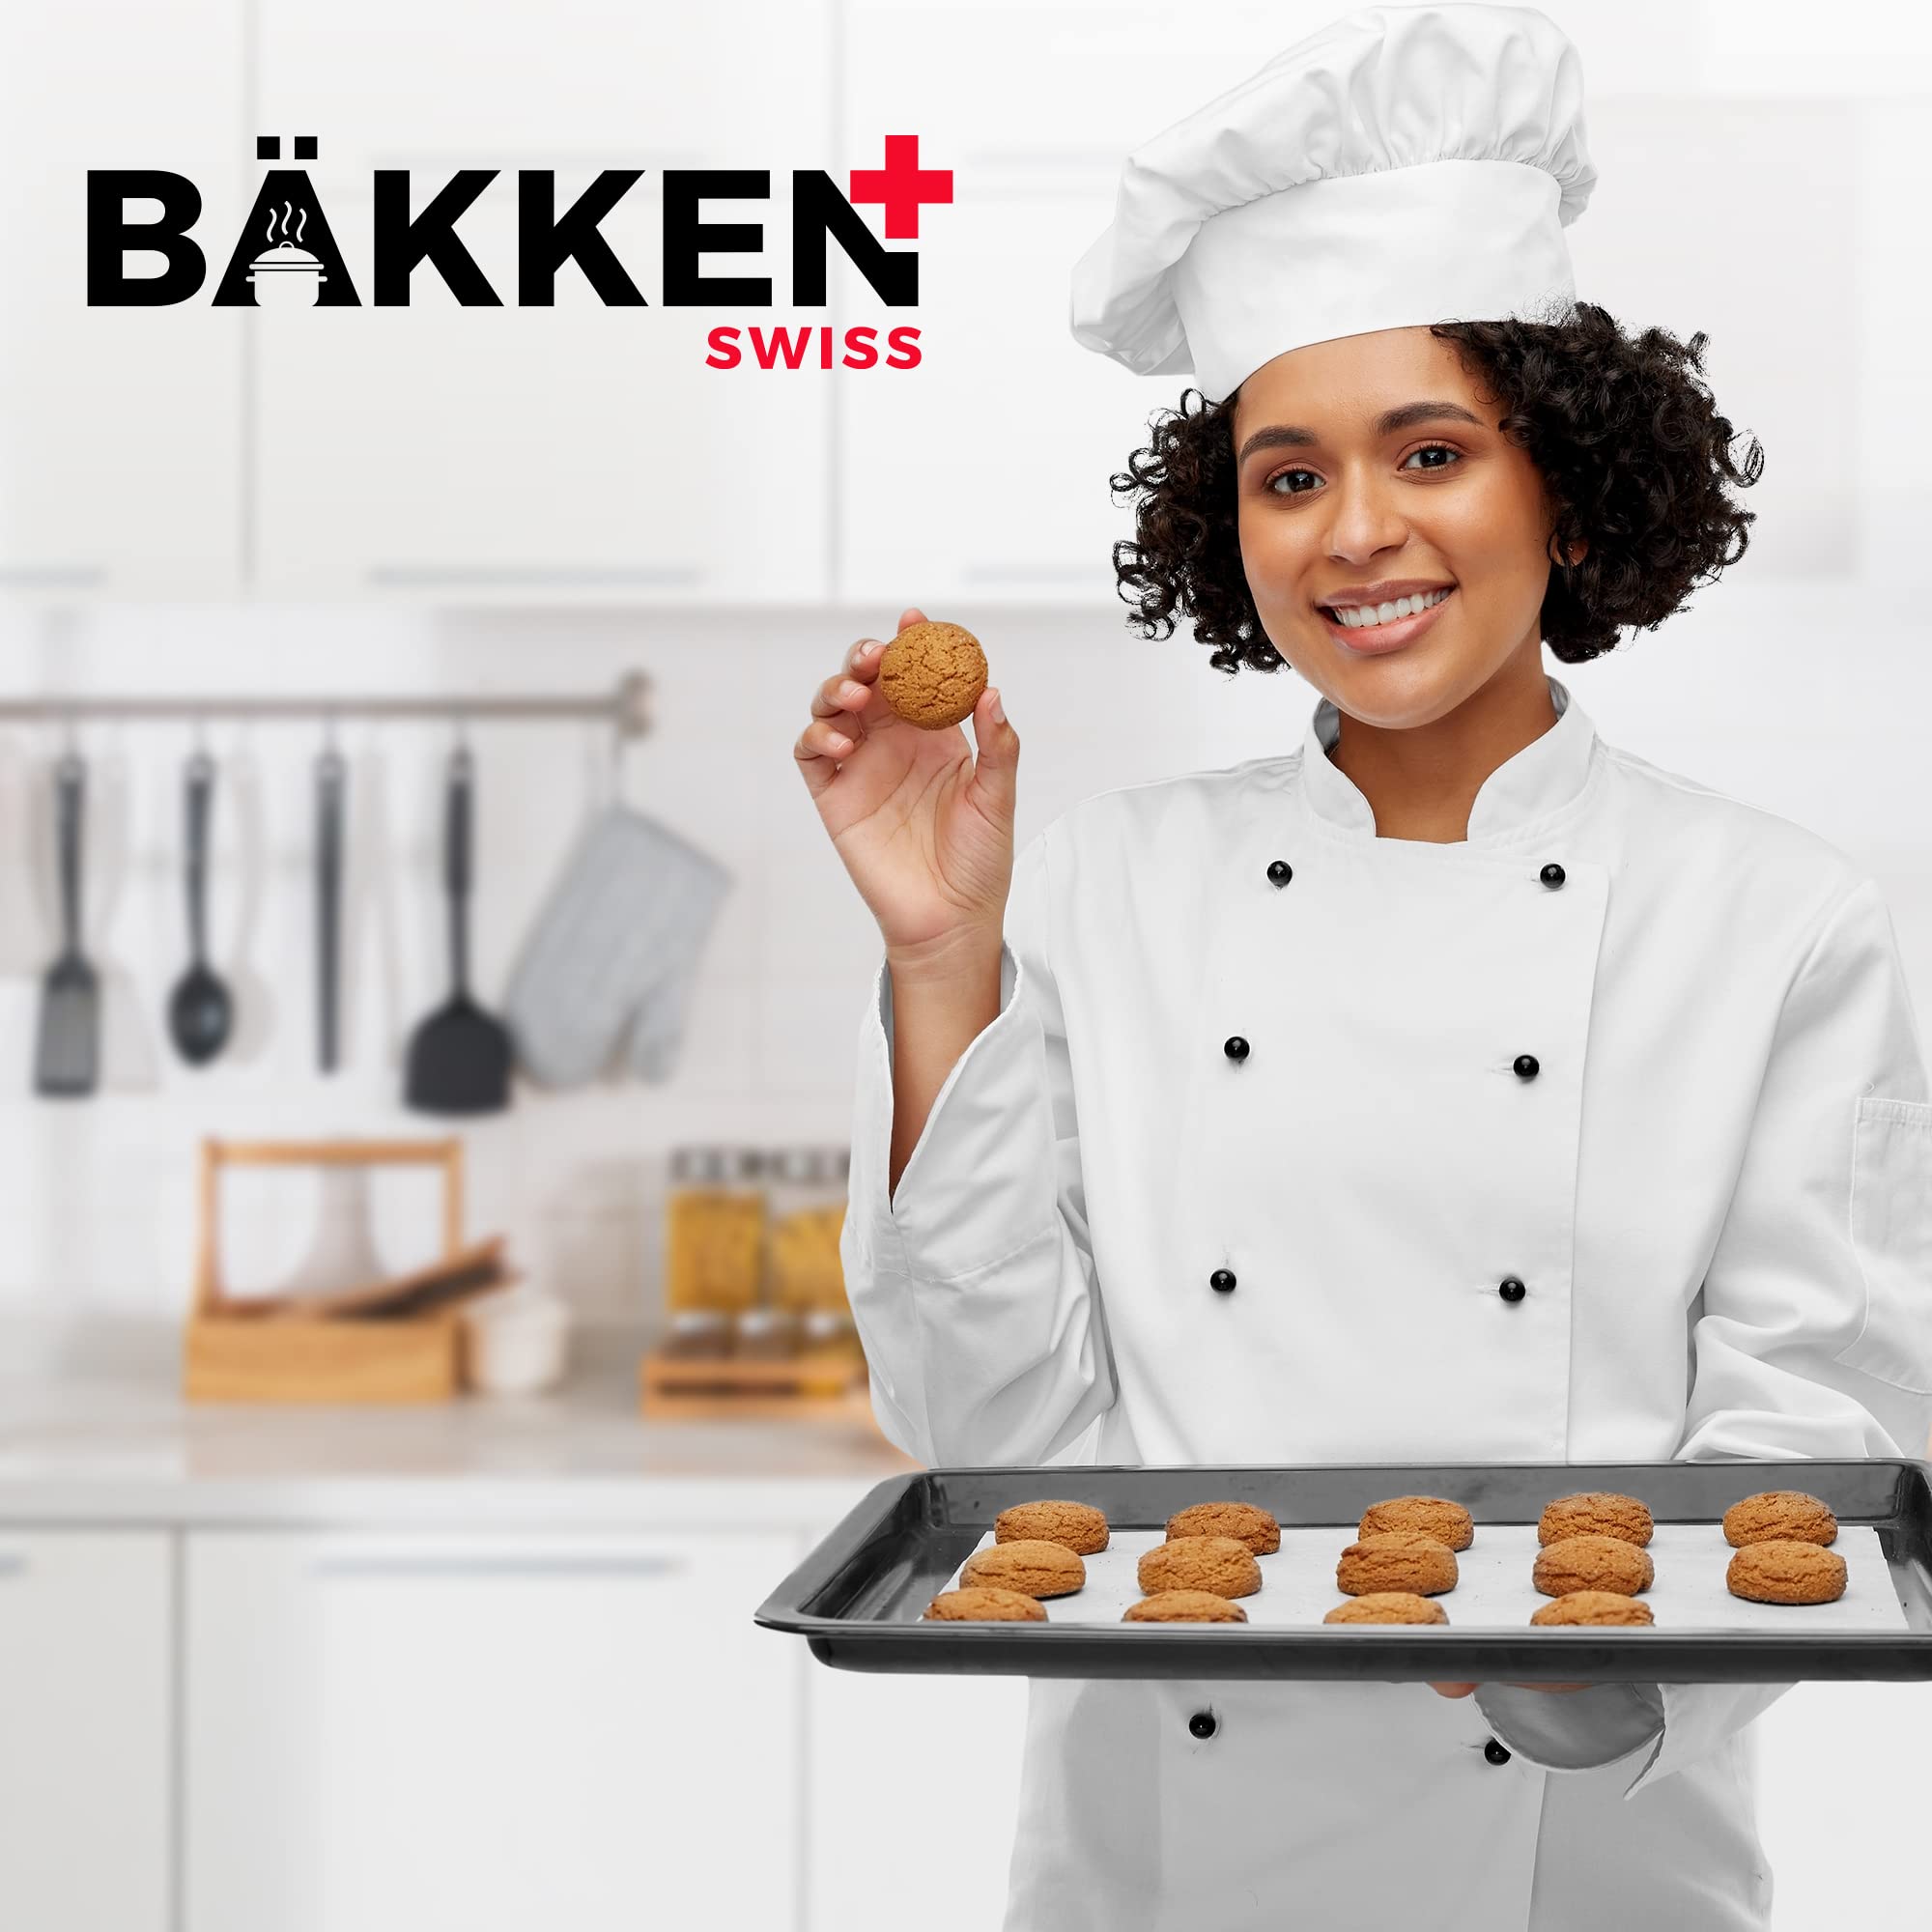 Baking Set – 10 Piece – Deluxe Non Stick Black Coating Inside and Outside – Carbon Steel Bakeware Set – PFOA PFOS and PTFE Free by Bakken